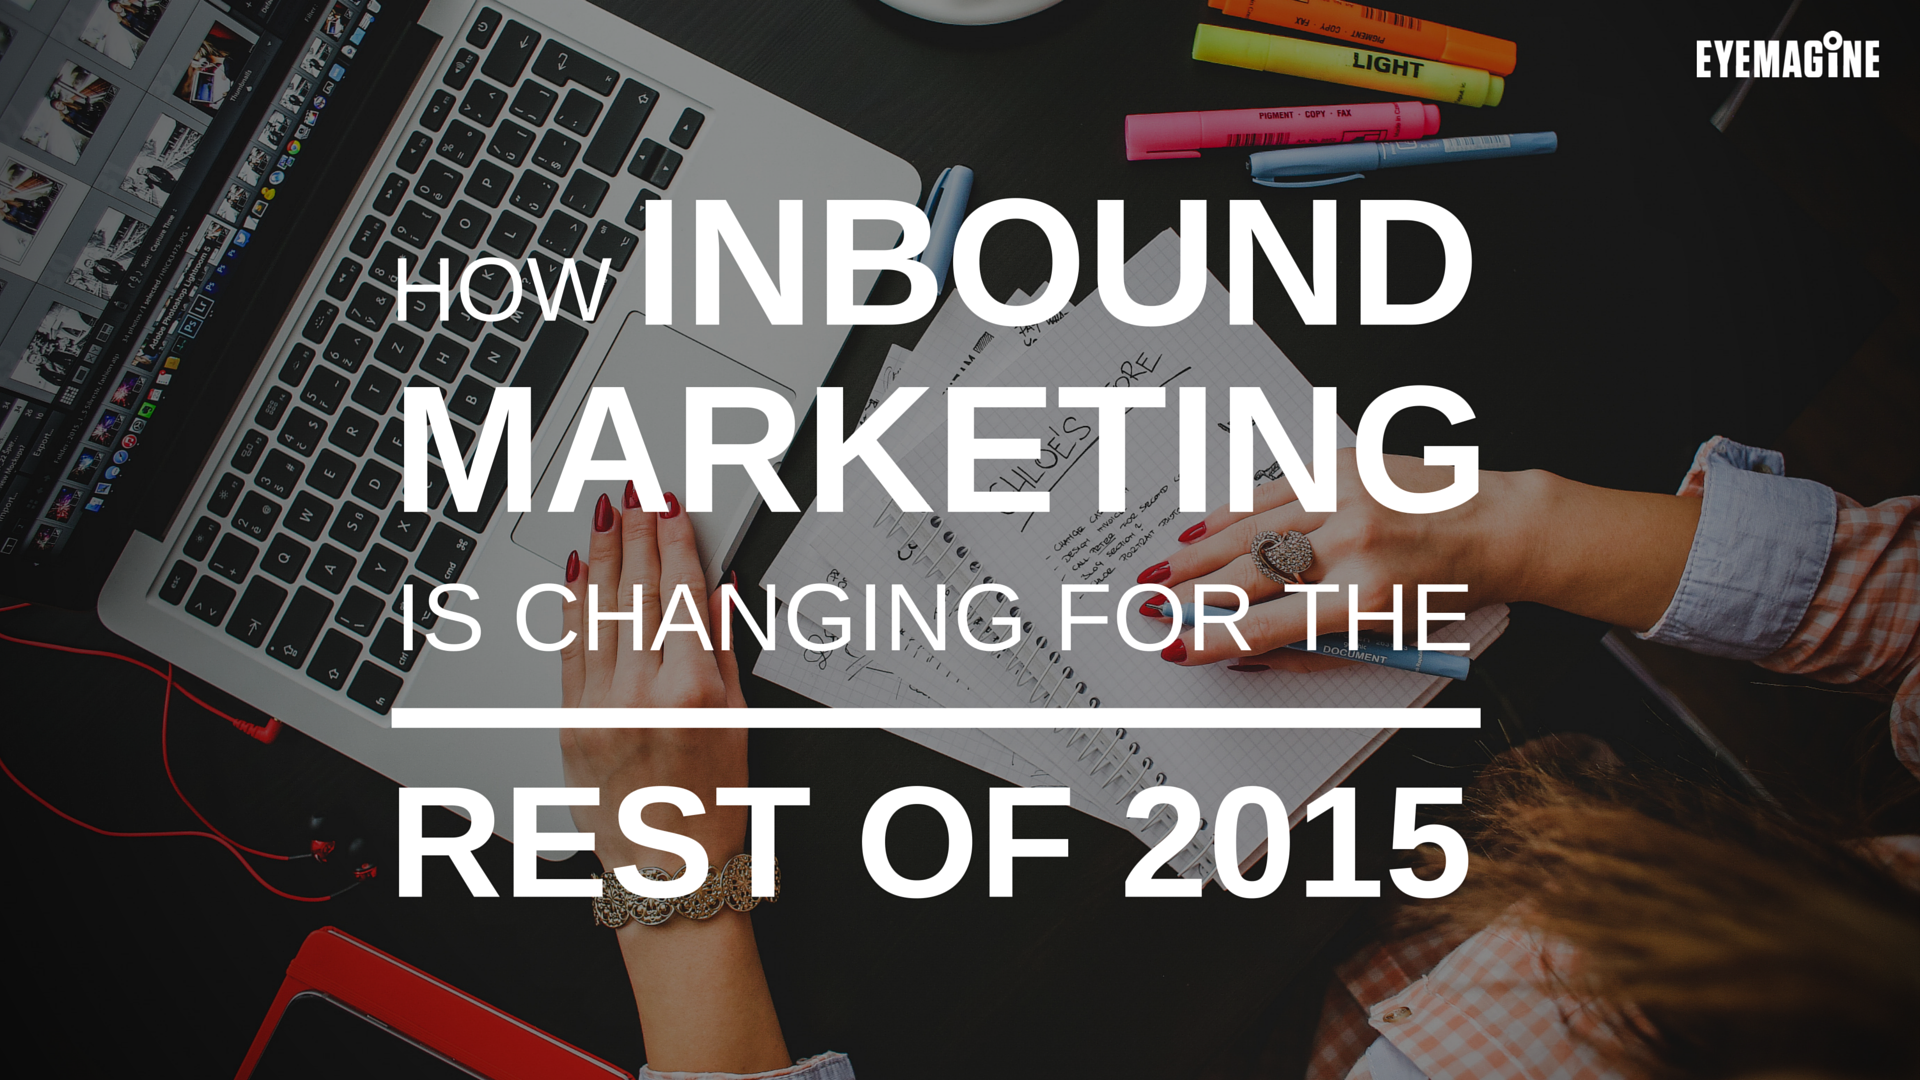 How Inbound Marketing is Changing for the Rest of 2015